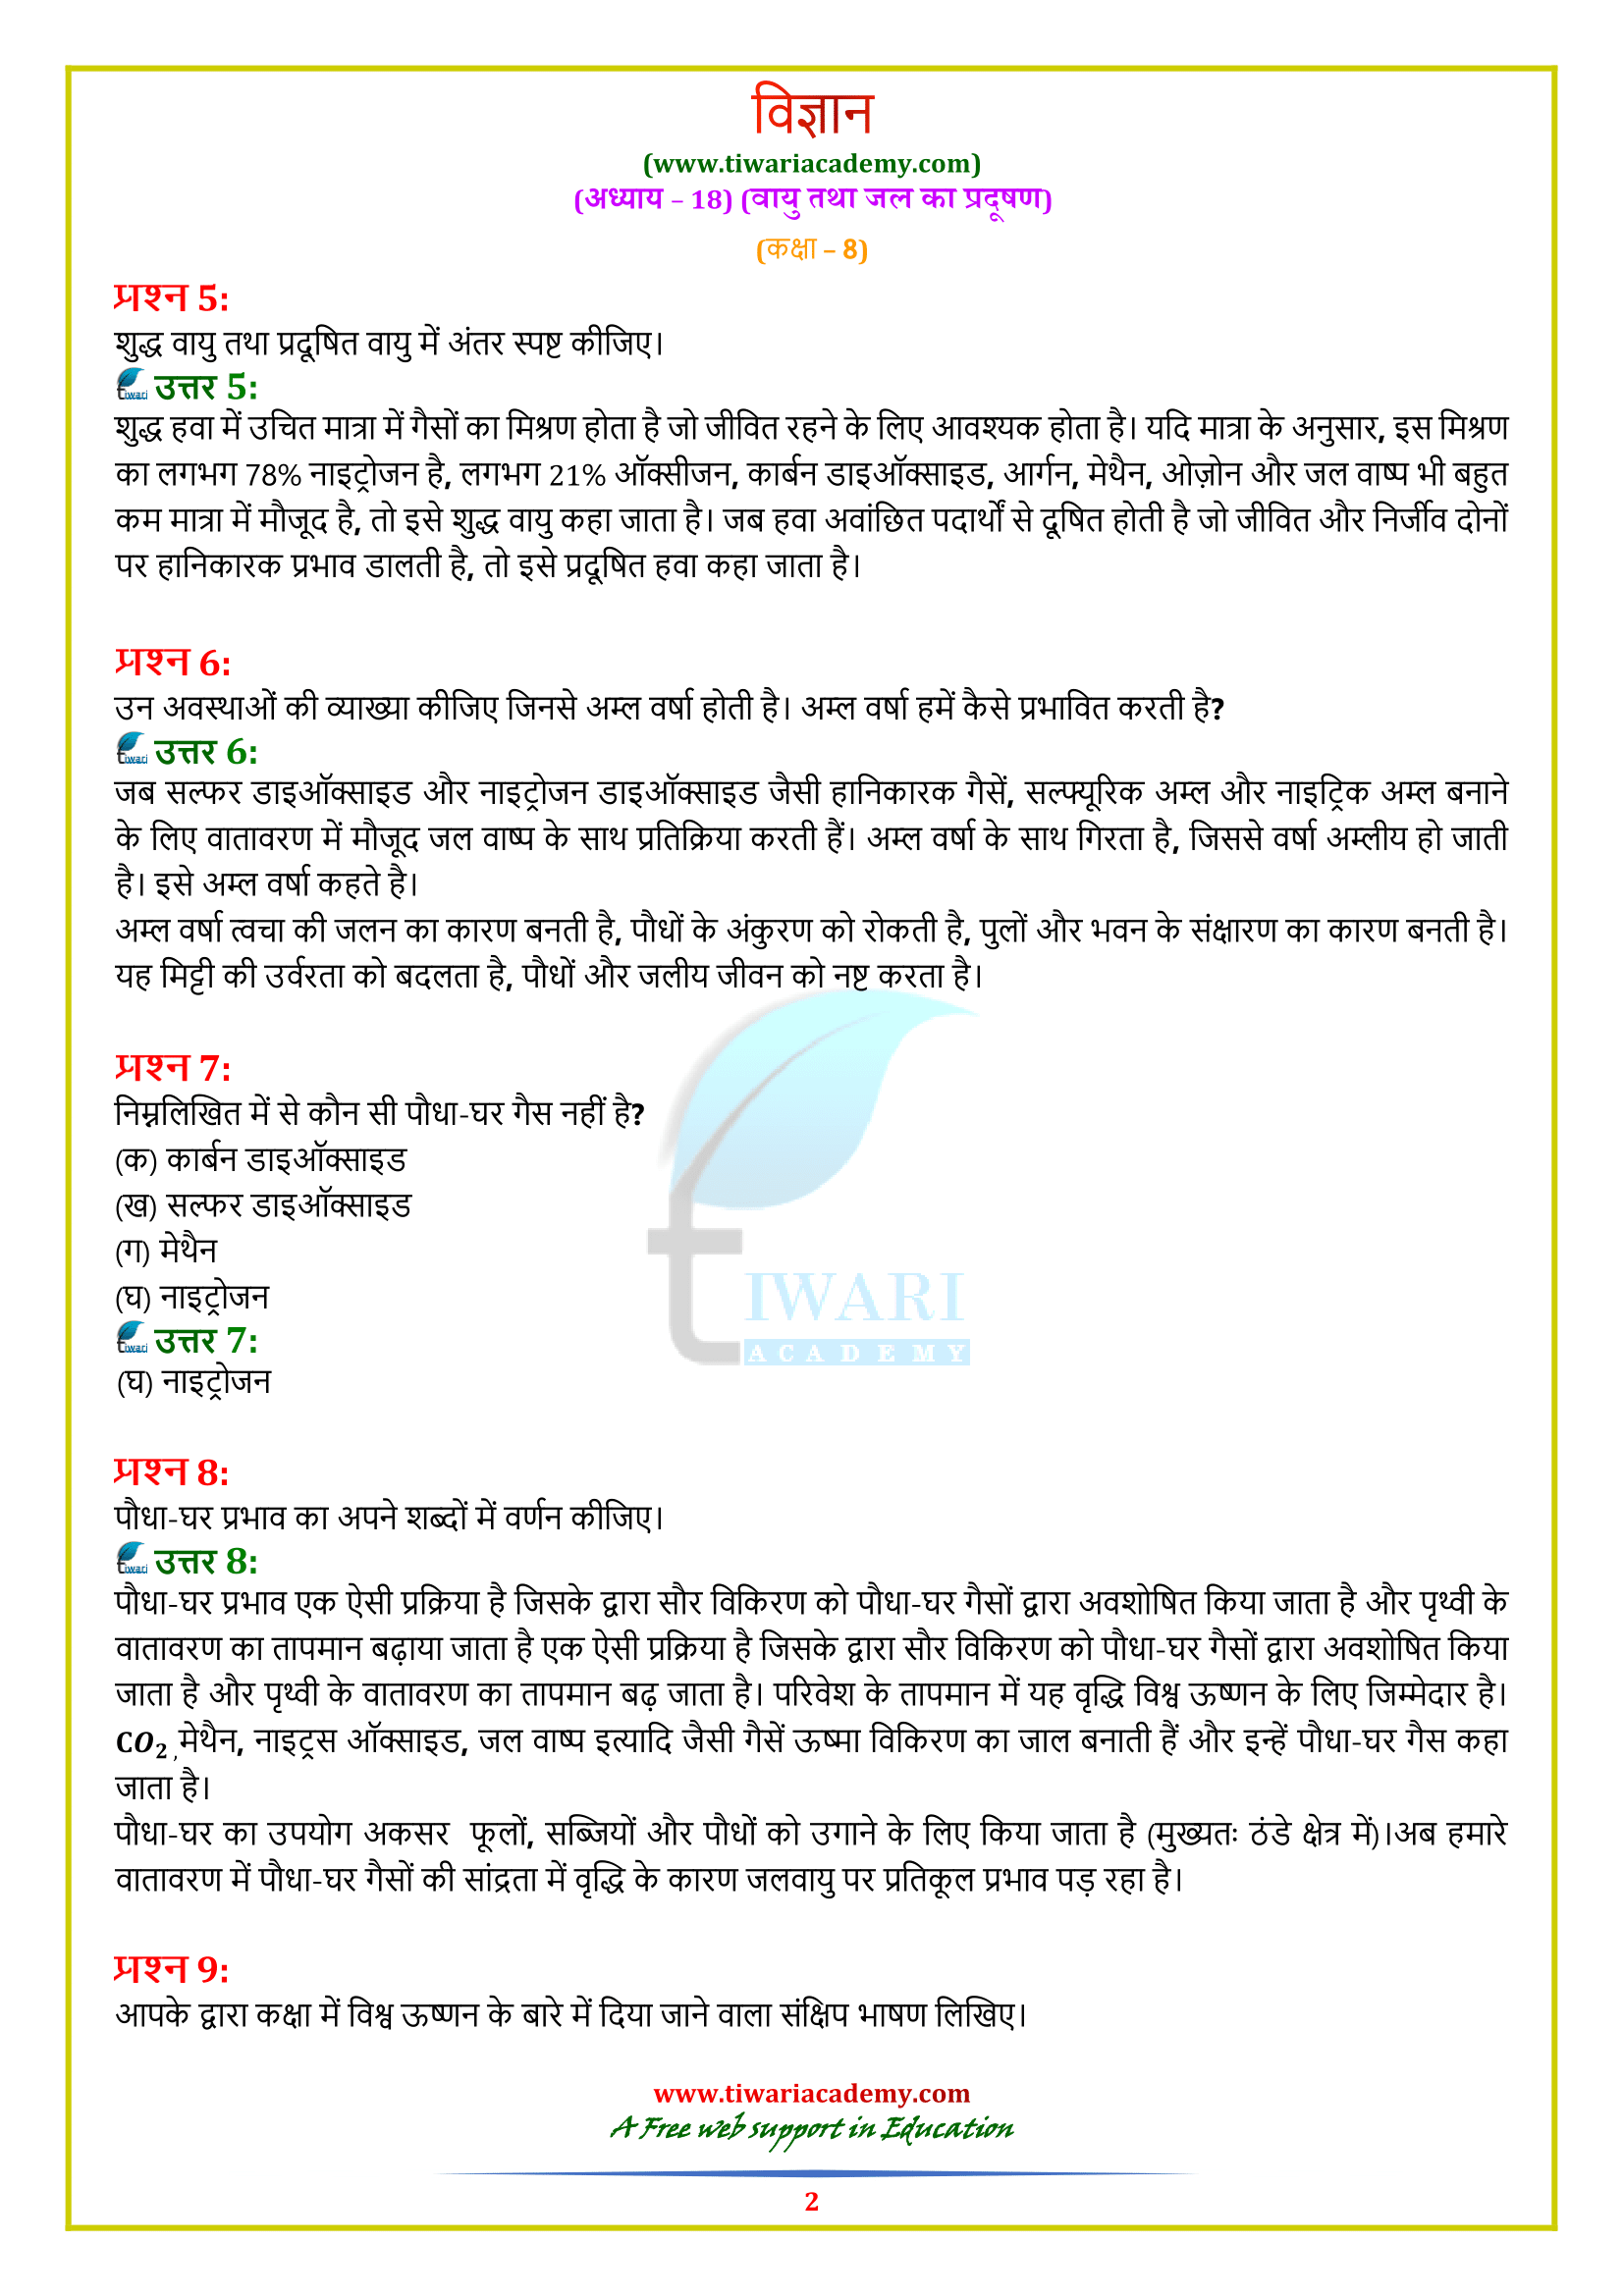 NCERT Solutions for Class 8 Science Chapter 18 in Hindi medium